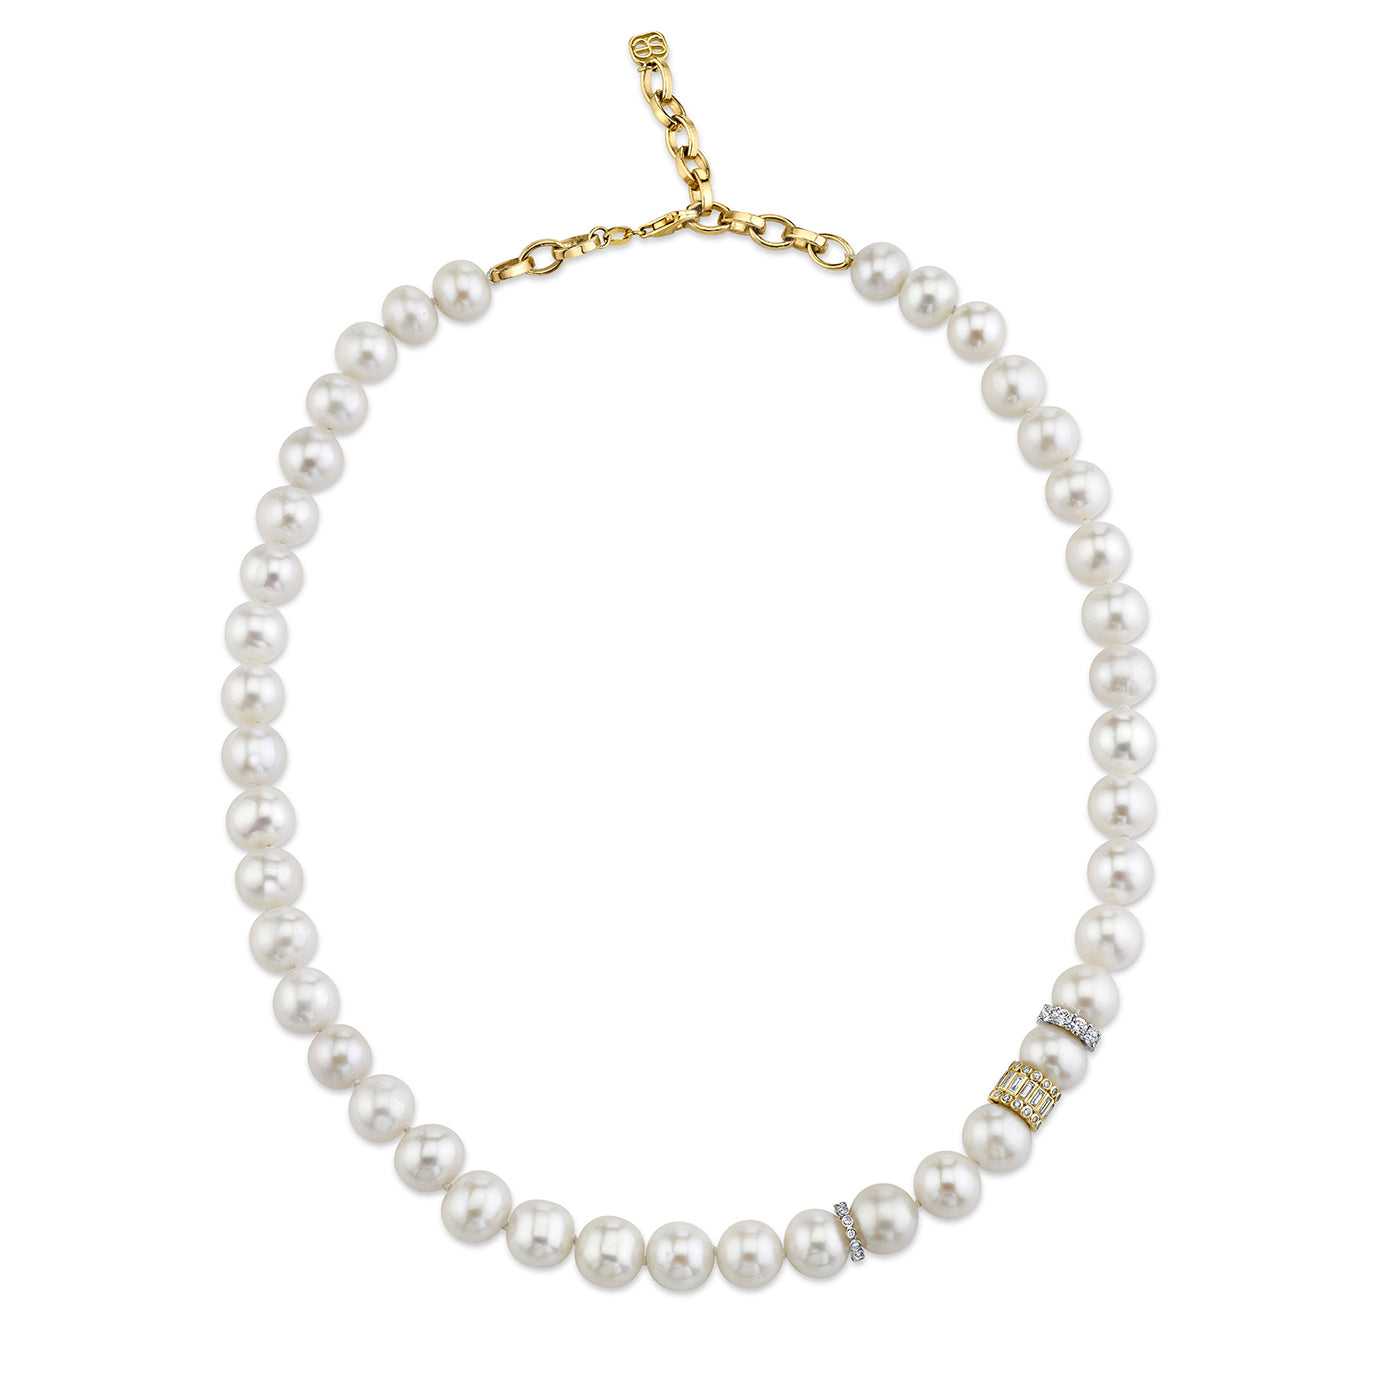 8-9mm, White Freshwater Cultured Pearl Rope Strand Necklace, 72 Inch